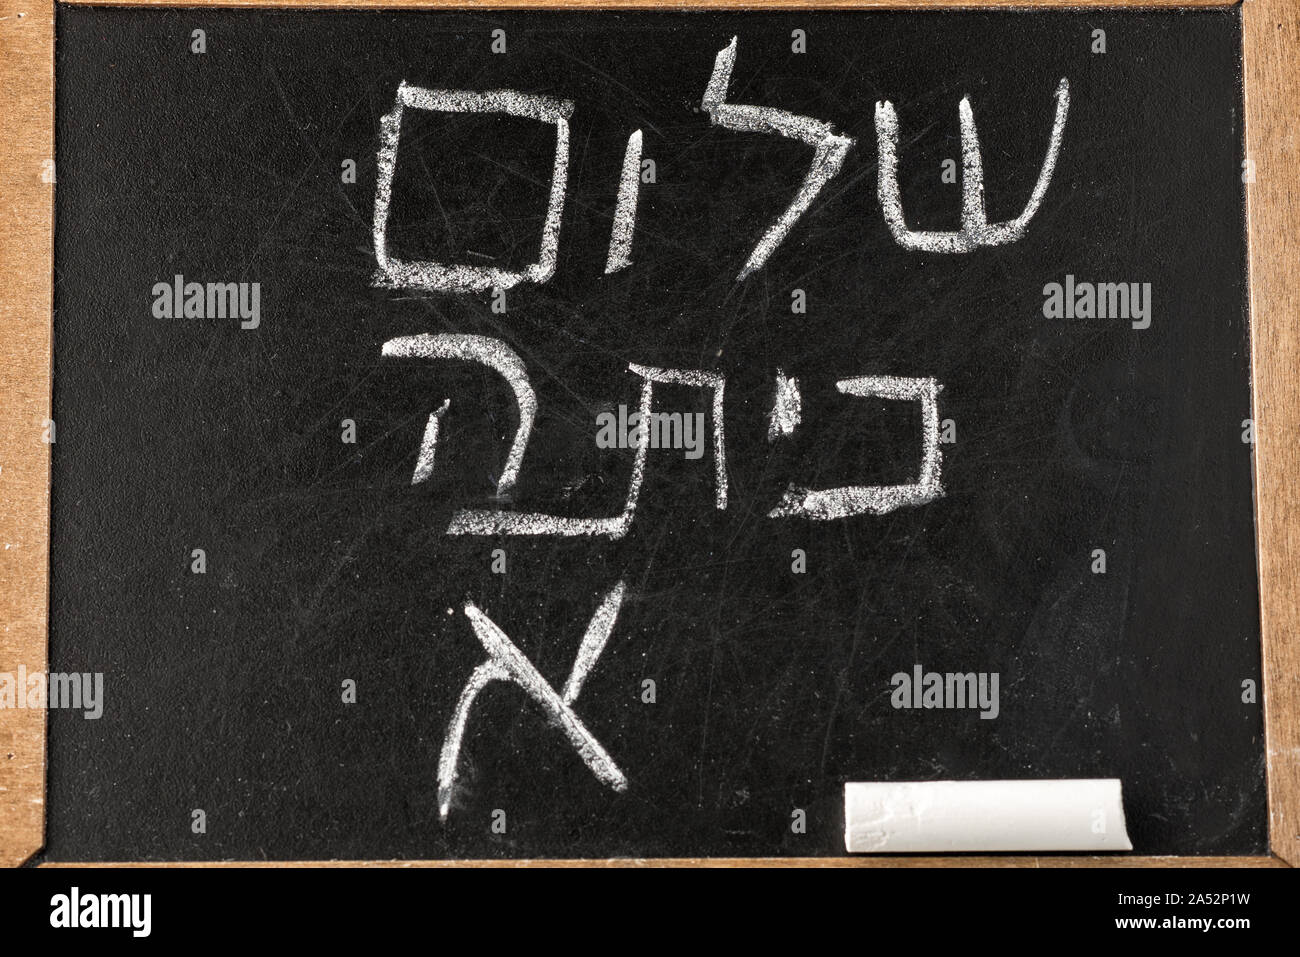 Back to School. Blackboard or chalkboard with Hello First Grade class greetings in Hebrew Shalom Kita Alef written with white chalk on the black board. Stock Photo